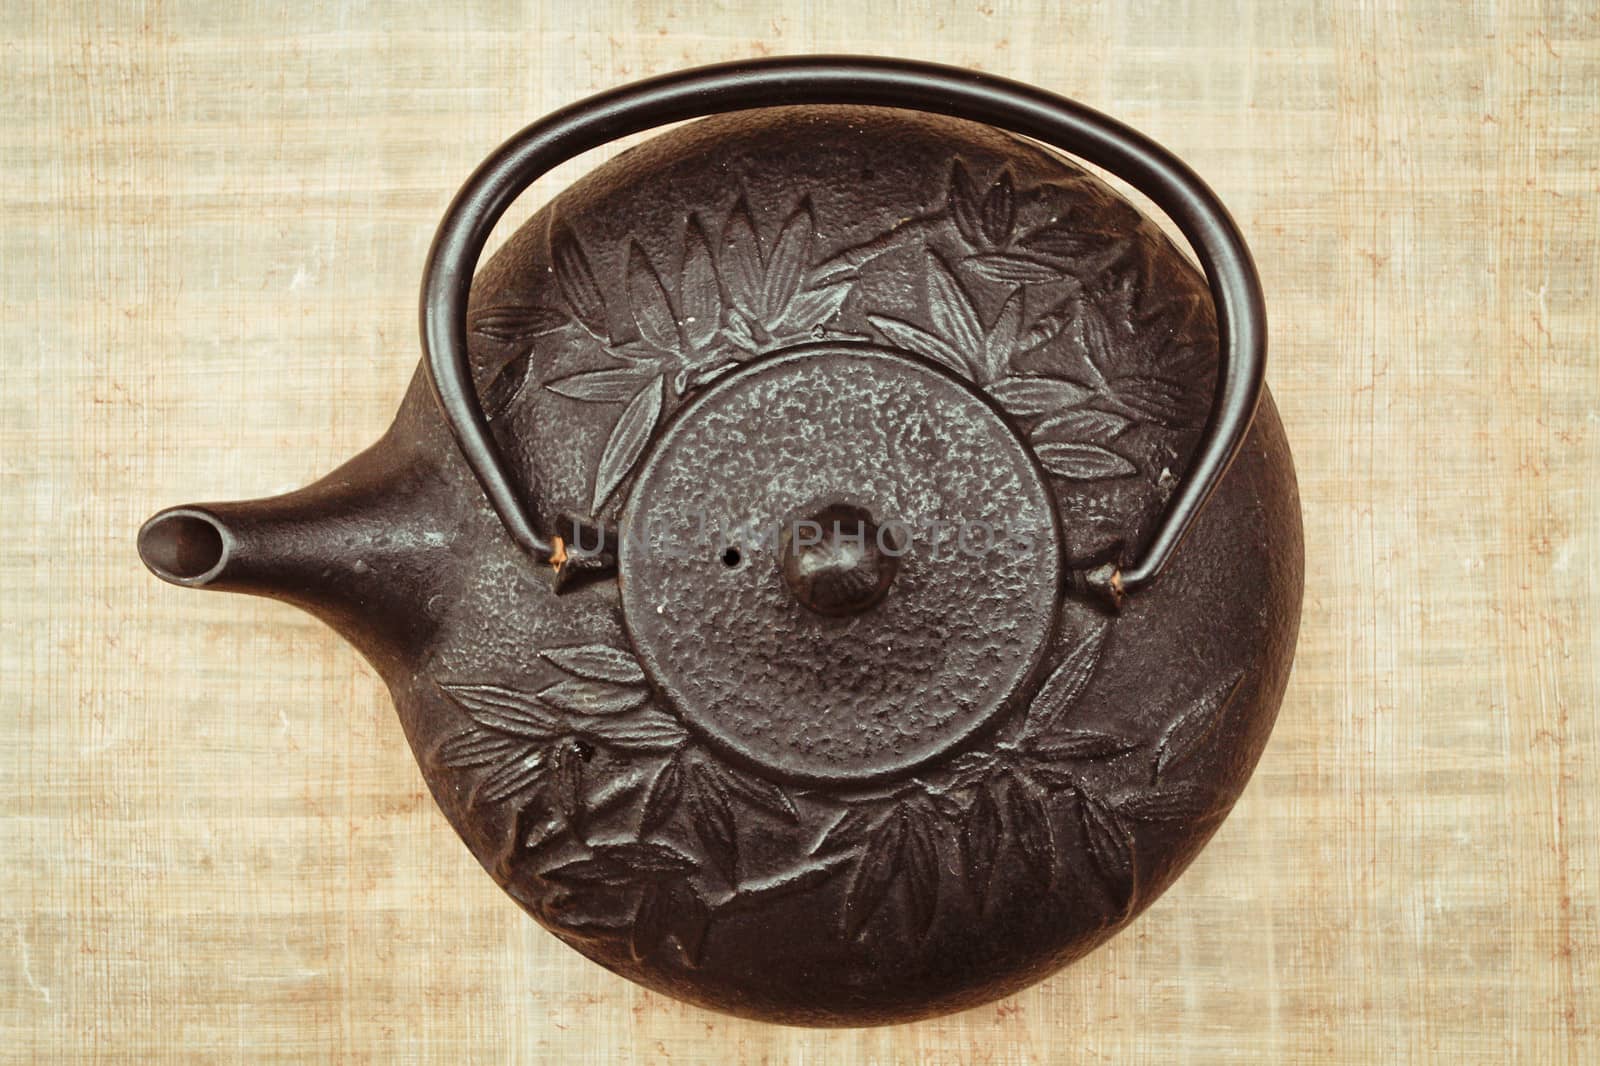 A traditional Japanese wrought iron teapot